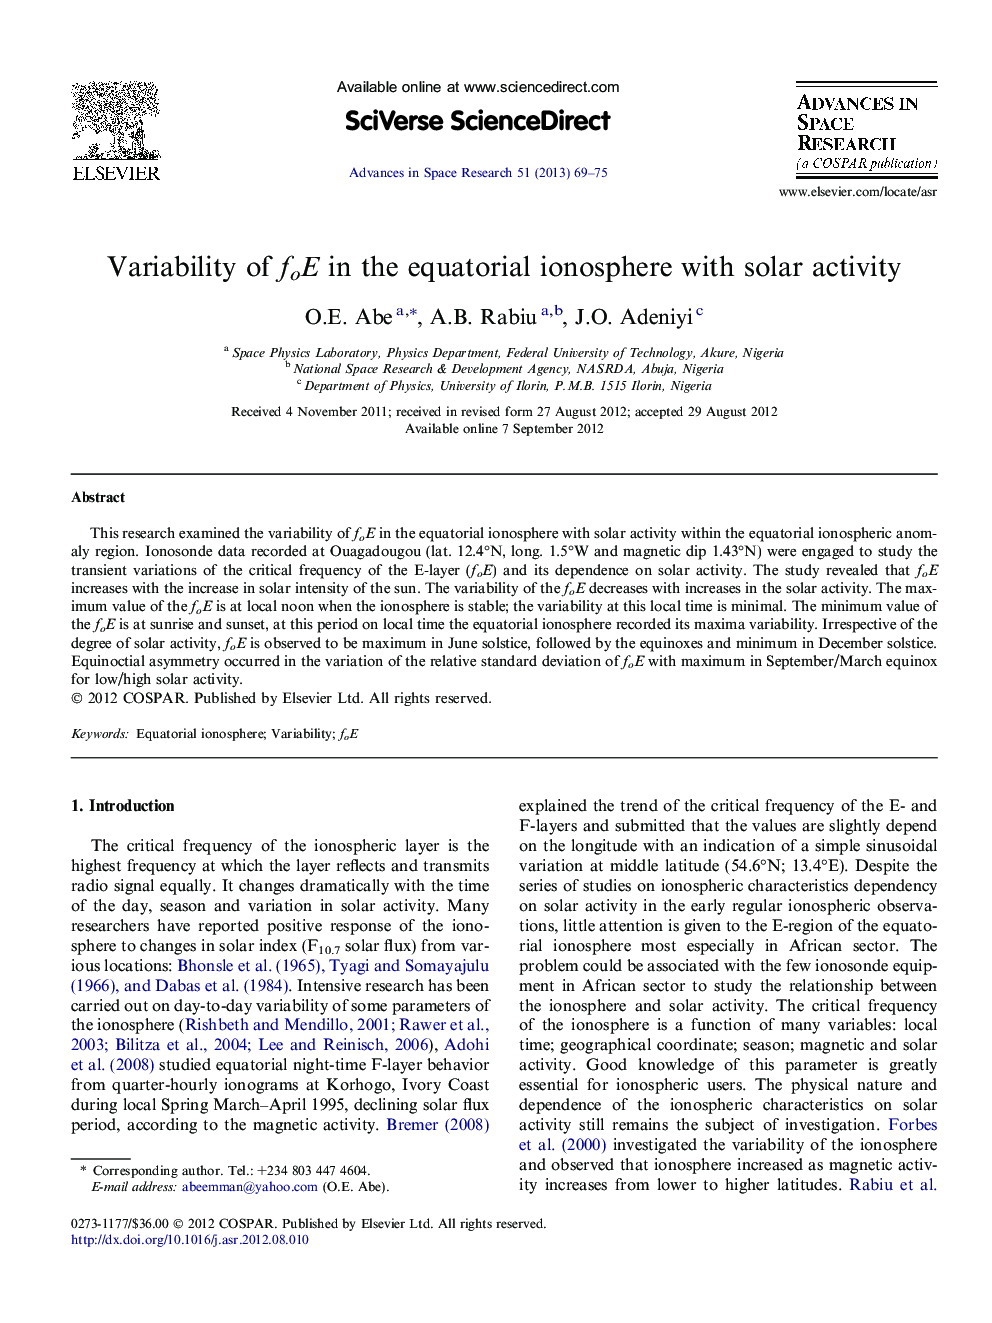 Variability of foE in the equatorial ionosphere with solar activity